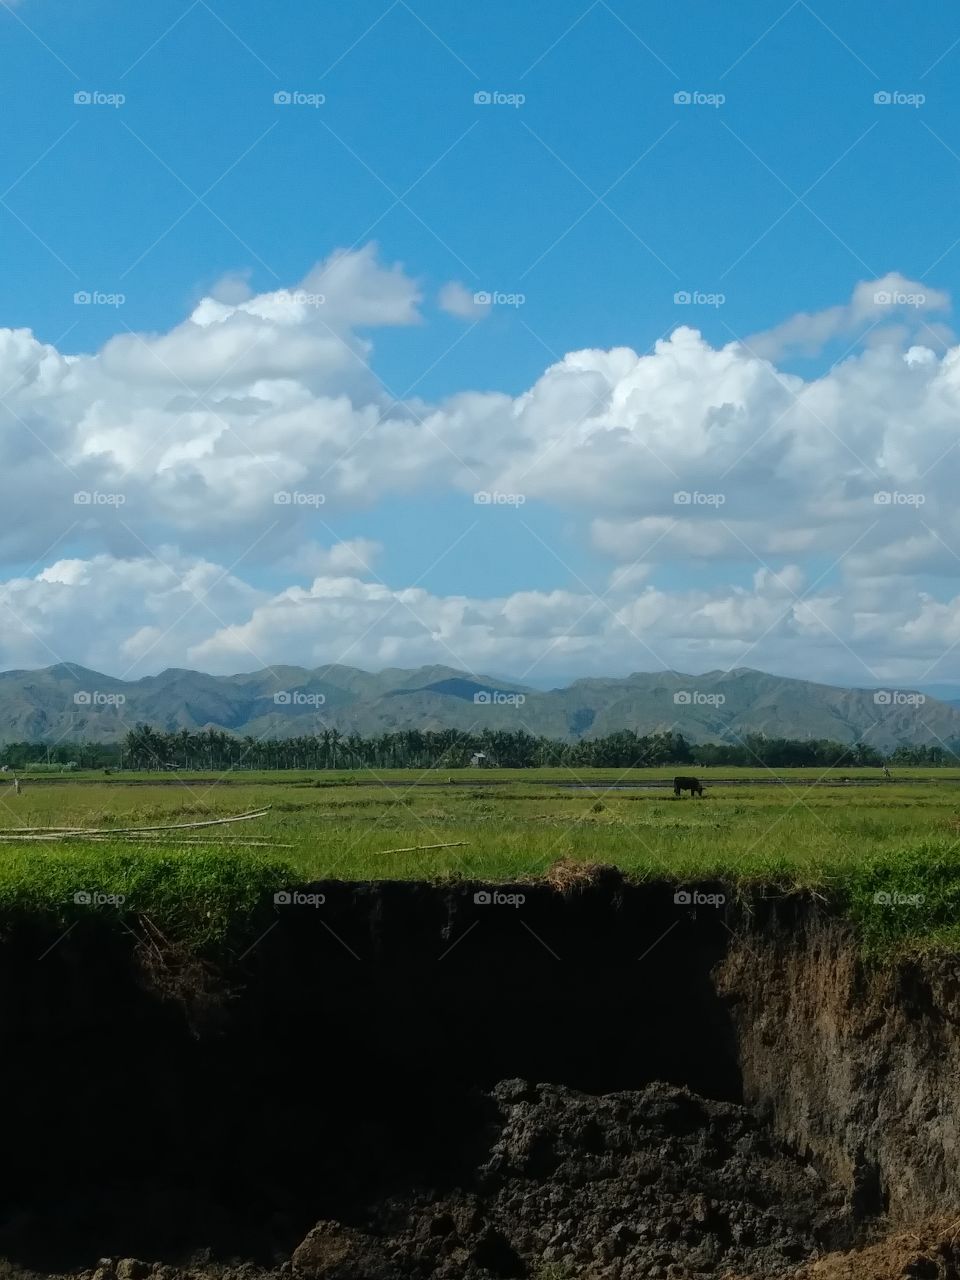 The AWESOME Philippines mountains